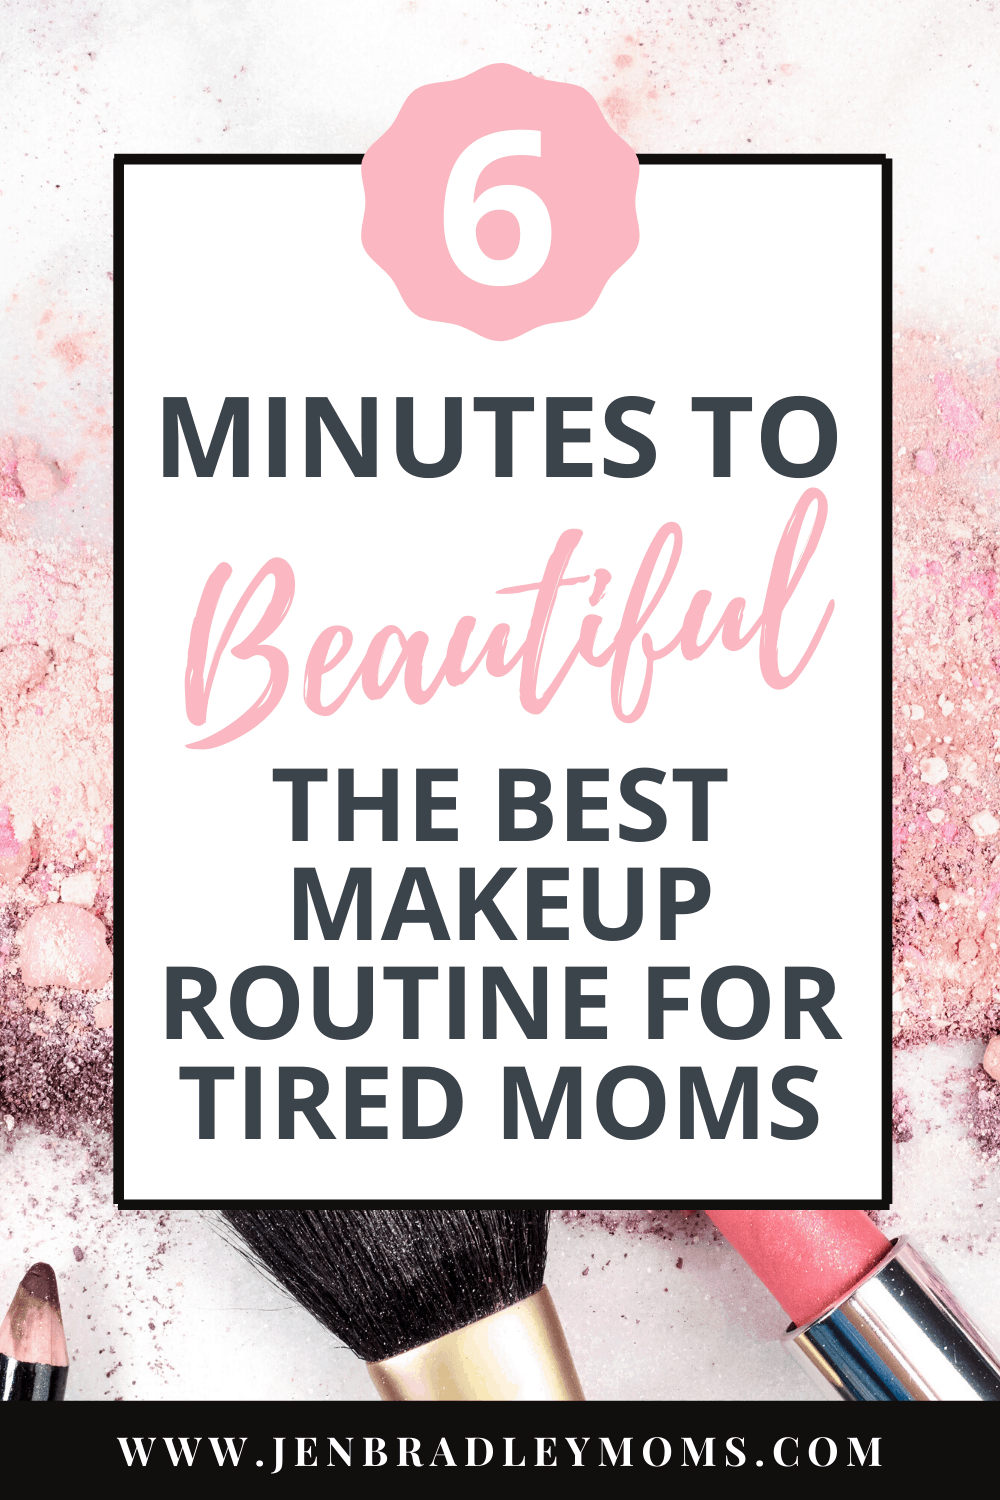 6 Minutes to Beautiful: The Best Makeup Routine for Tired Moms